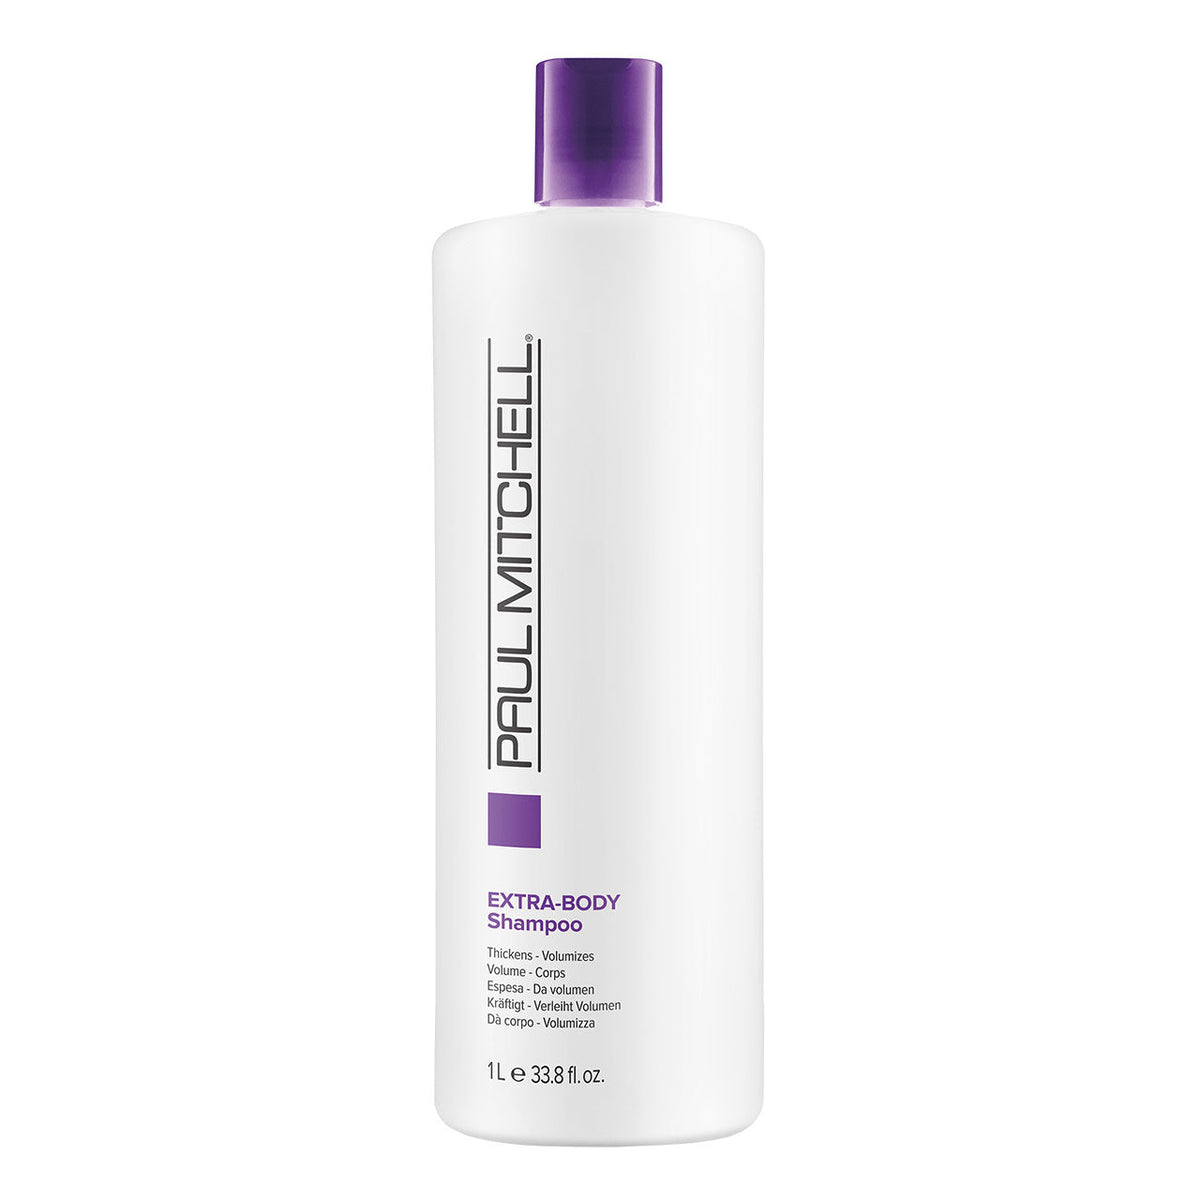 Extra-Body Shampoo - 1L - by Paul Mitchell |ProCare Outlet|